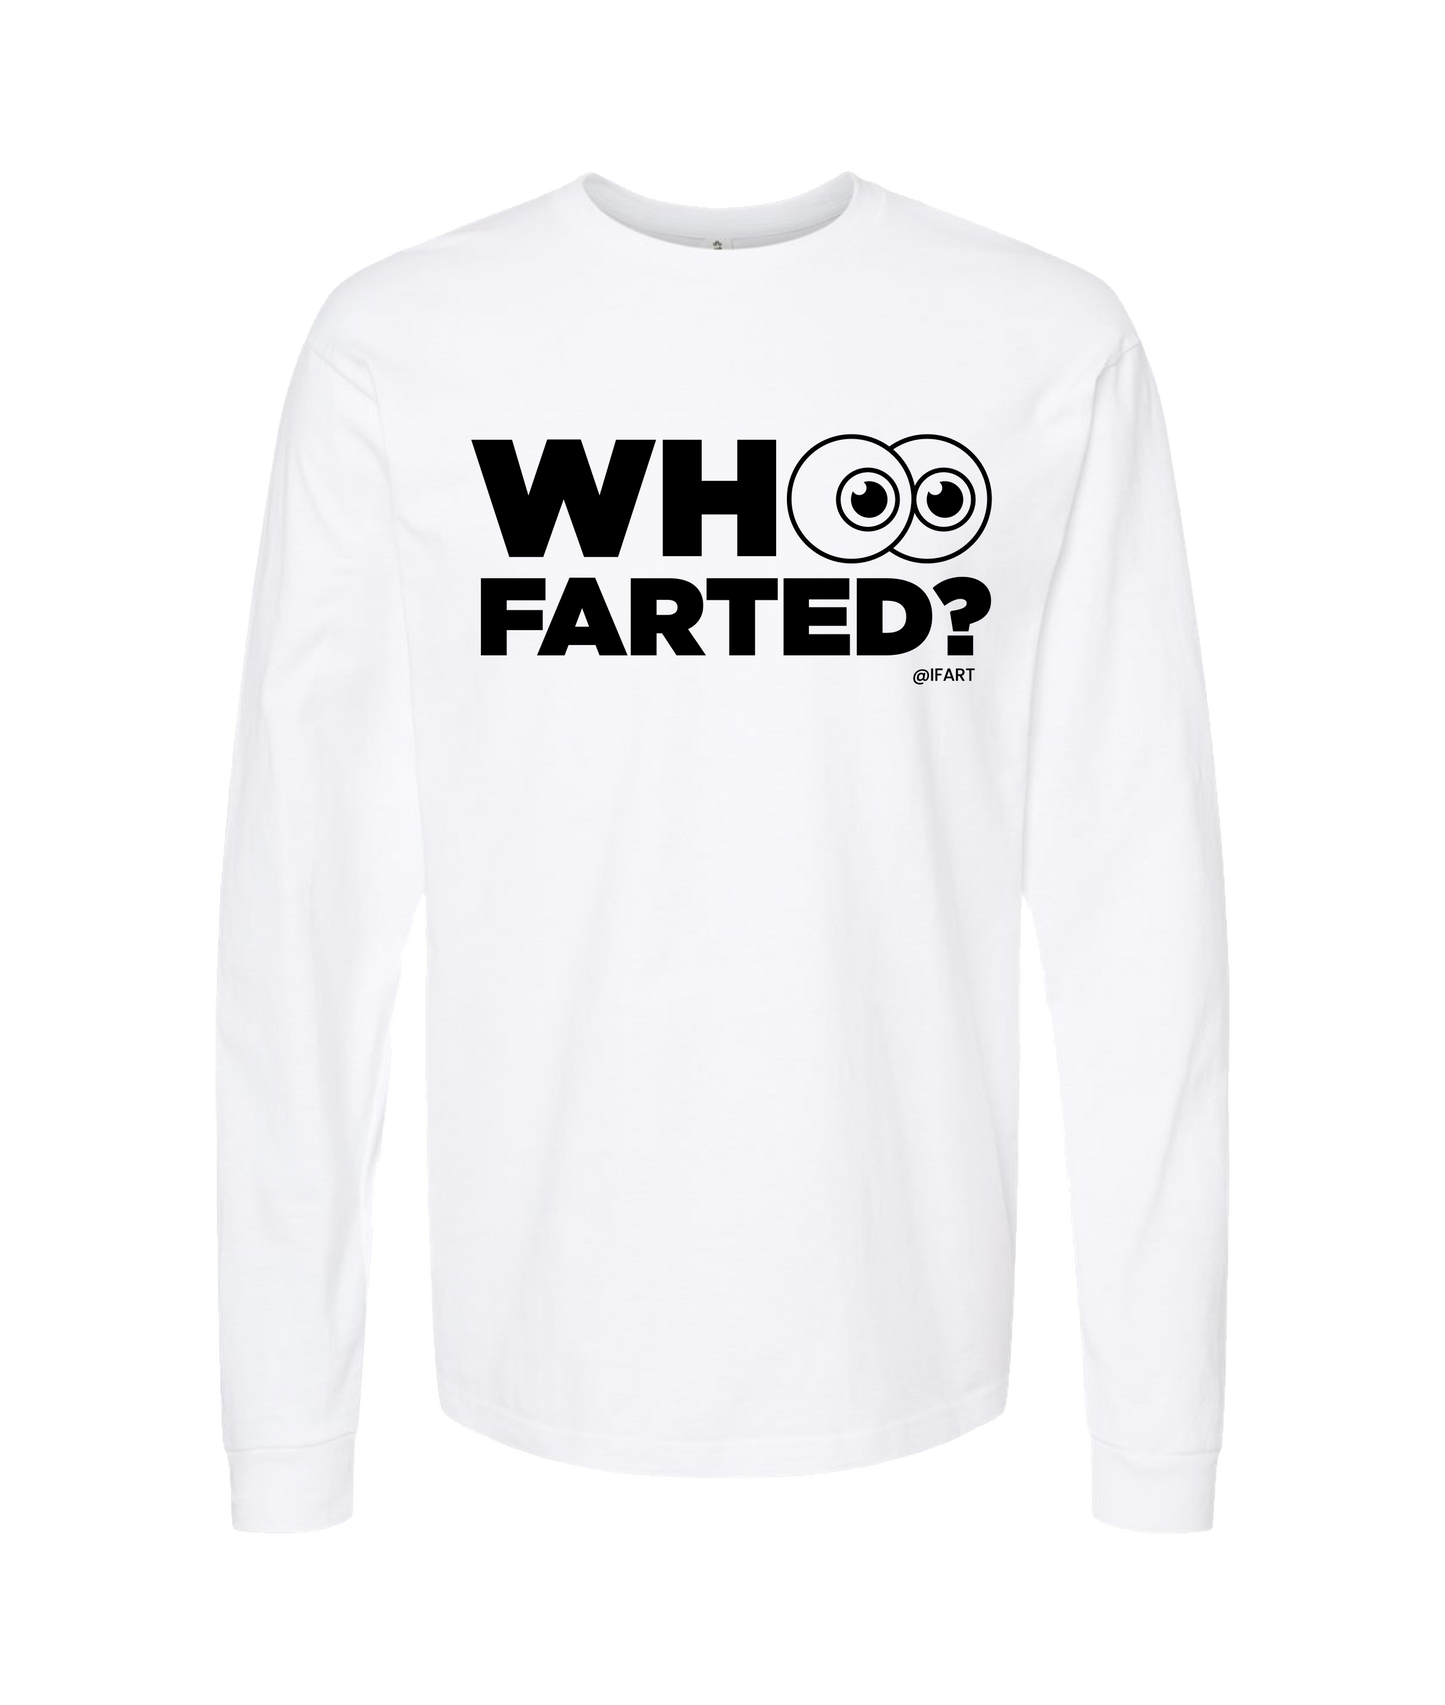 iFart - WHO FARTED? - White Long Sleeve T